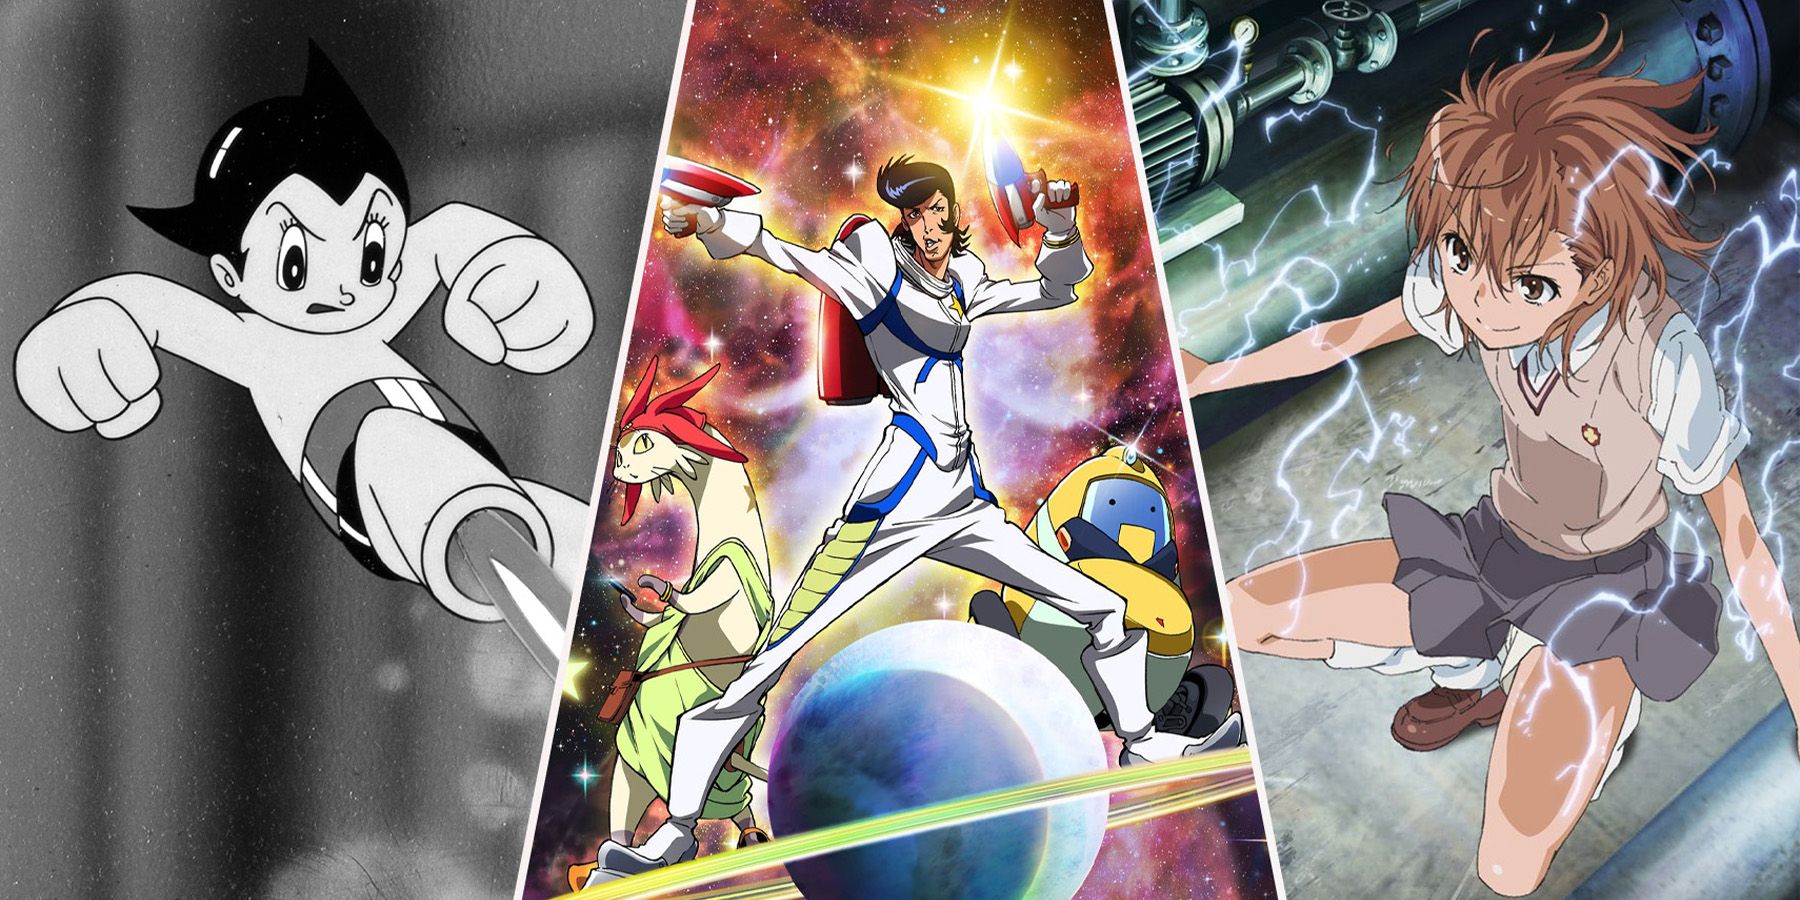 11 anime science fiction films to watch during lockdown